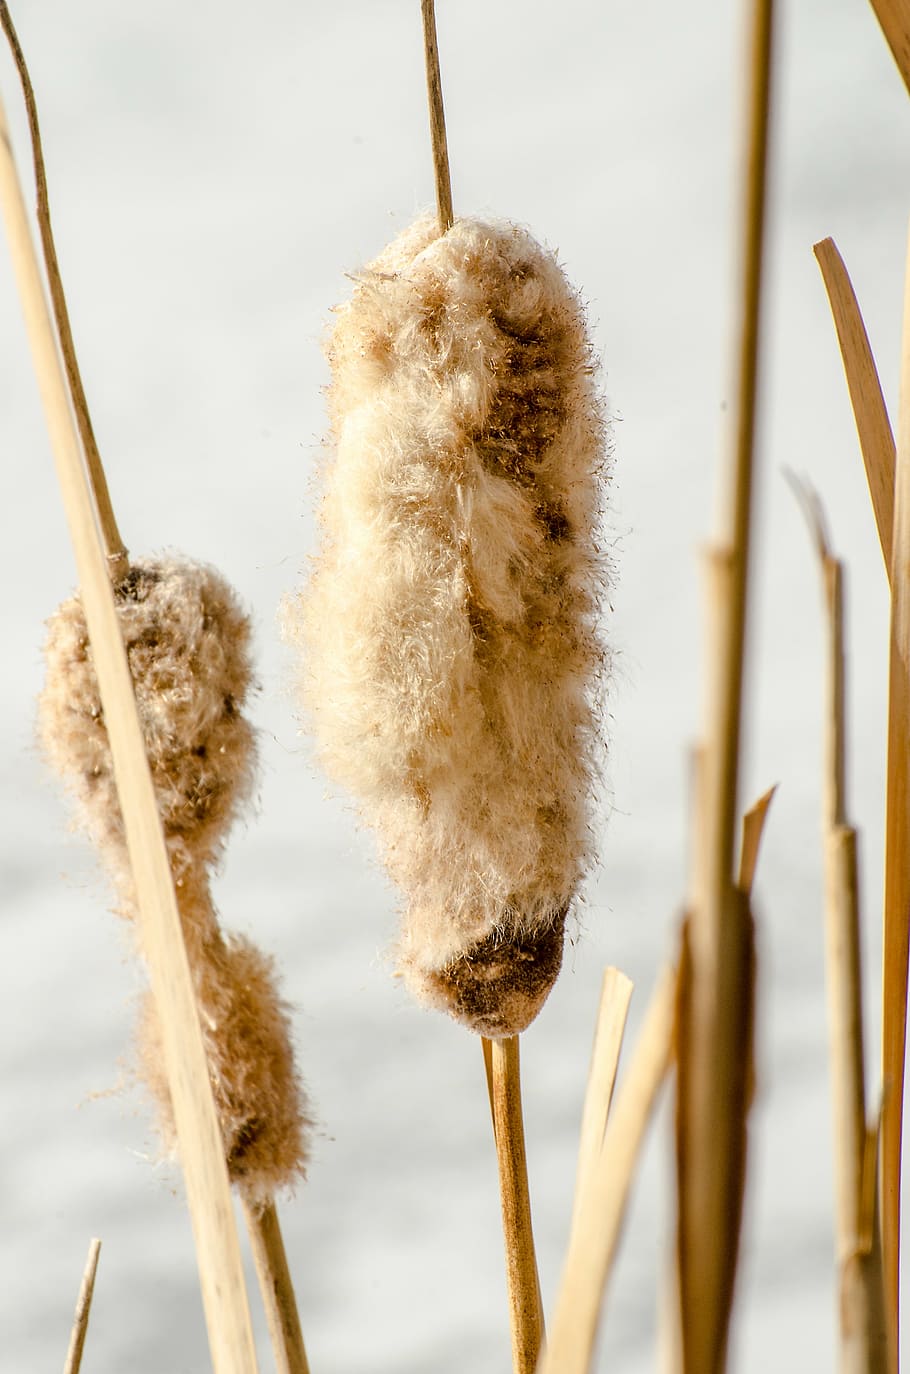 cattails, cattail, reeds, plants, lake plants, winter, nature, reed, plant, wetland